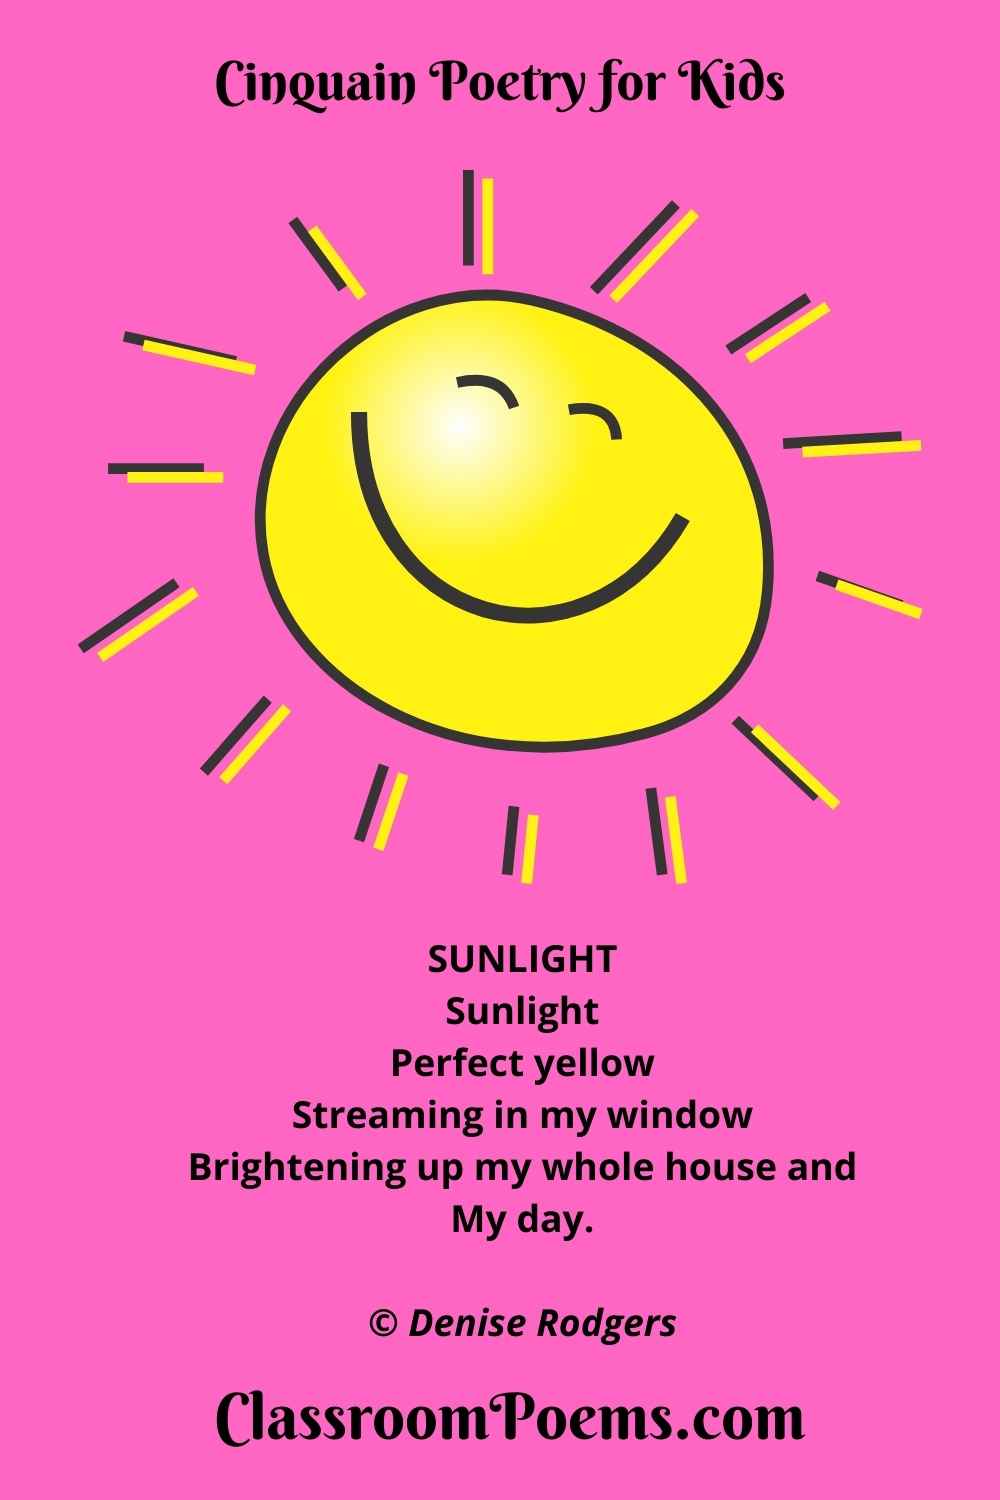 SUNLIGHT Cinquain Poem by the Poetry Lady Denise Rodgers on ClassroomPoems.com.